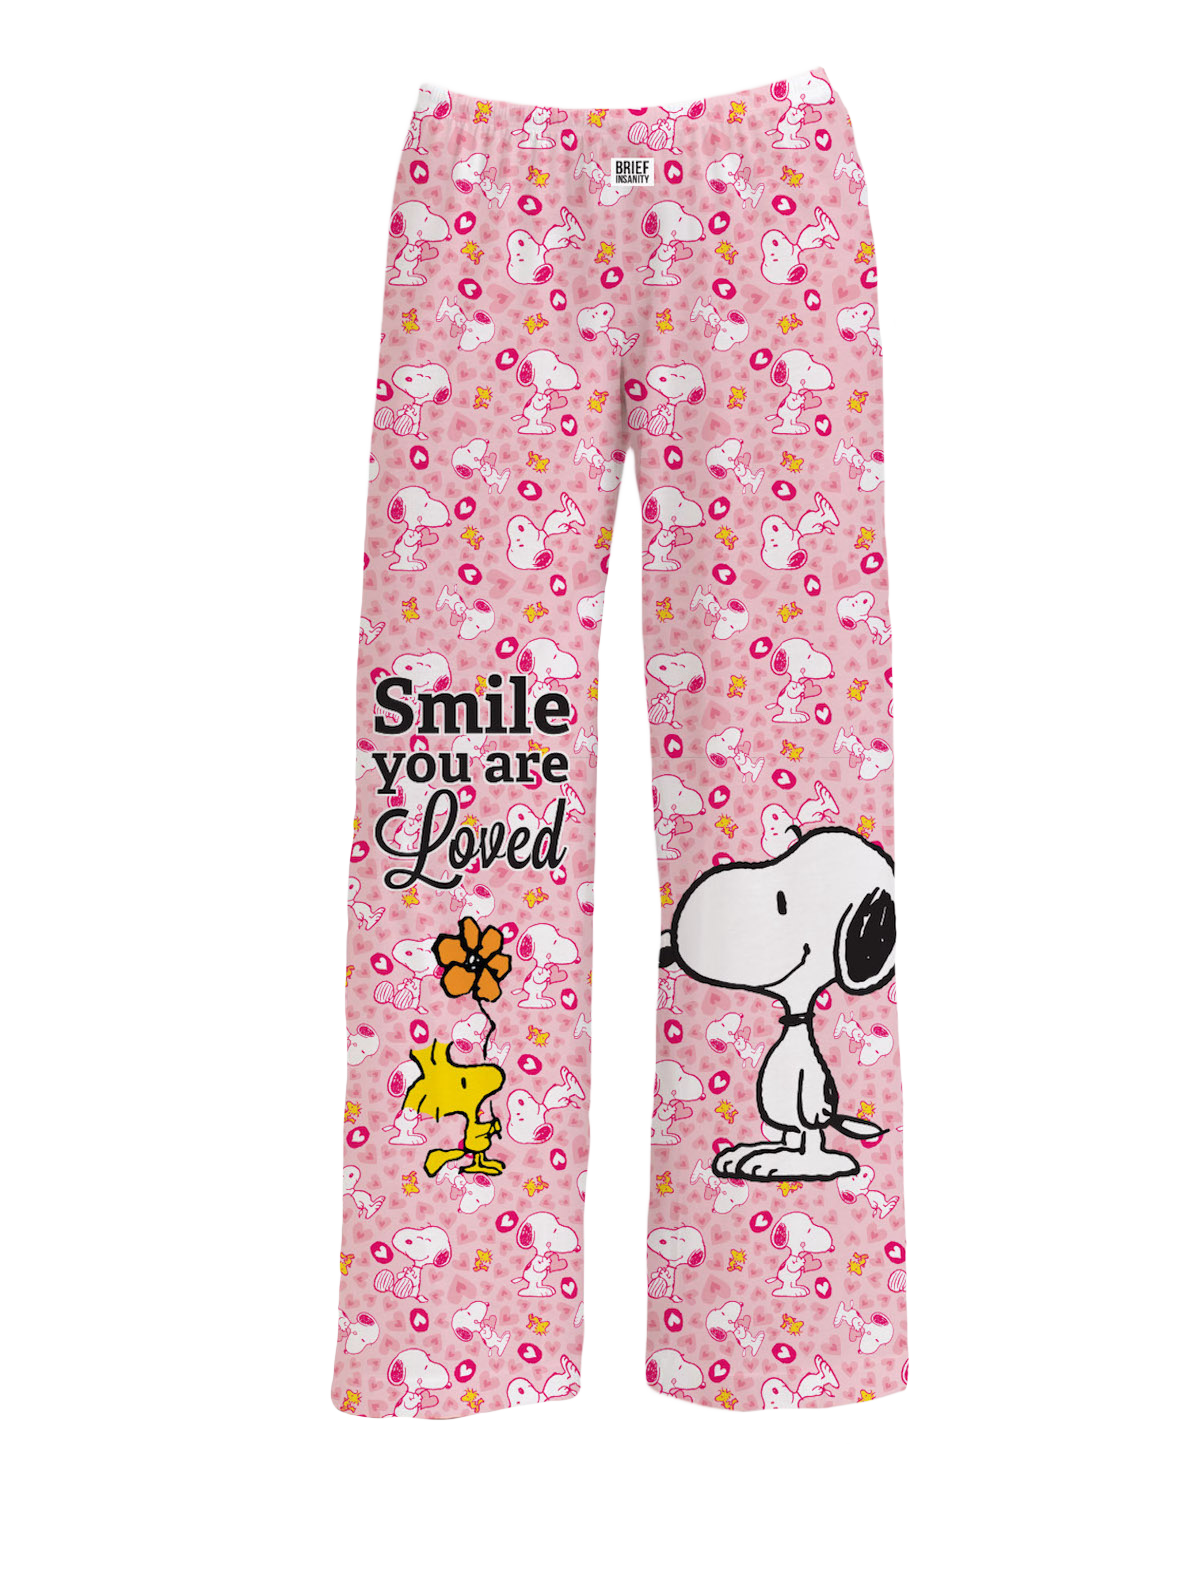 My favorite pajama pants are these Christmas fuzzy pants that have snoopy  from peanuts : r/pajamapants